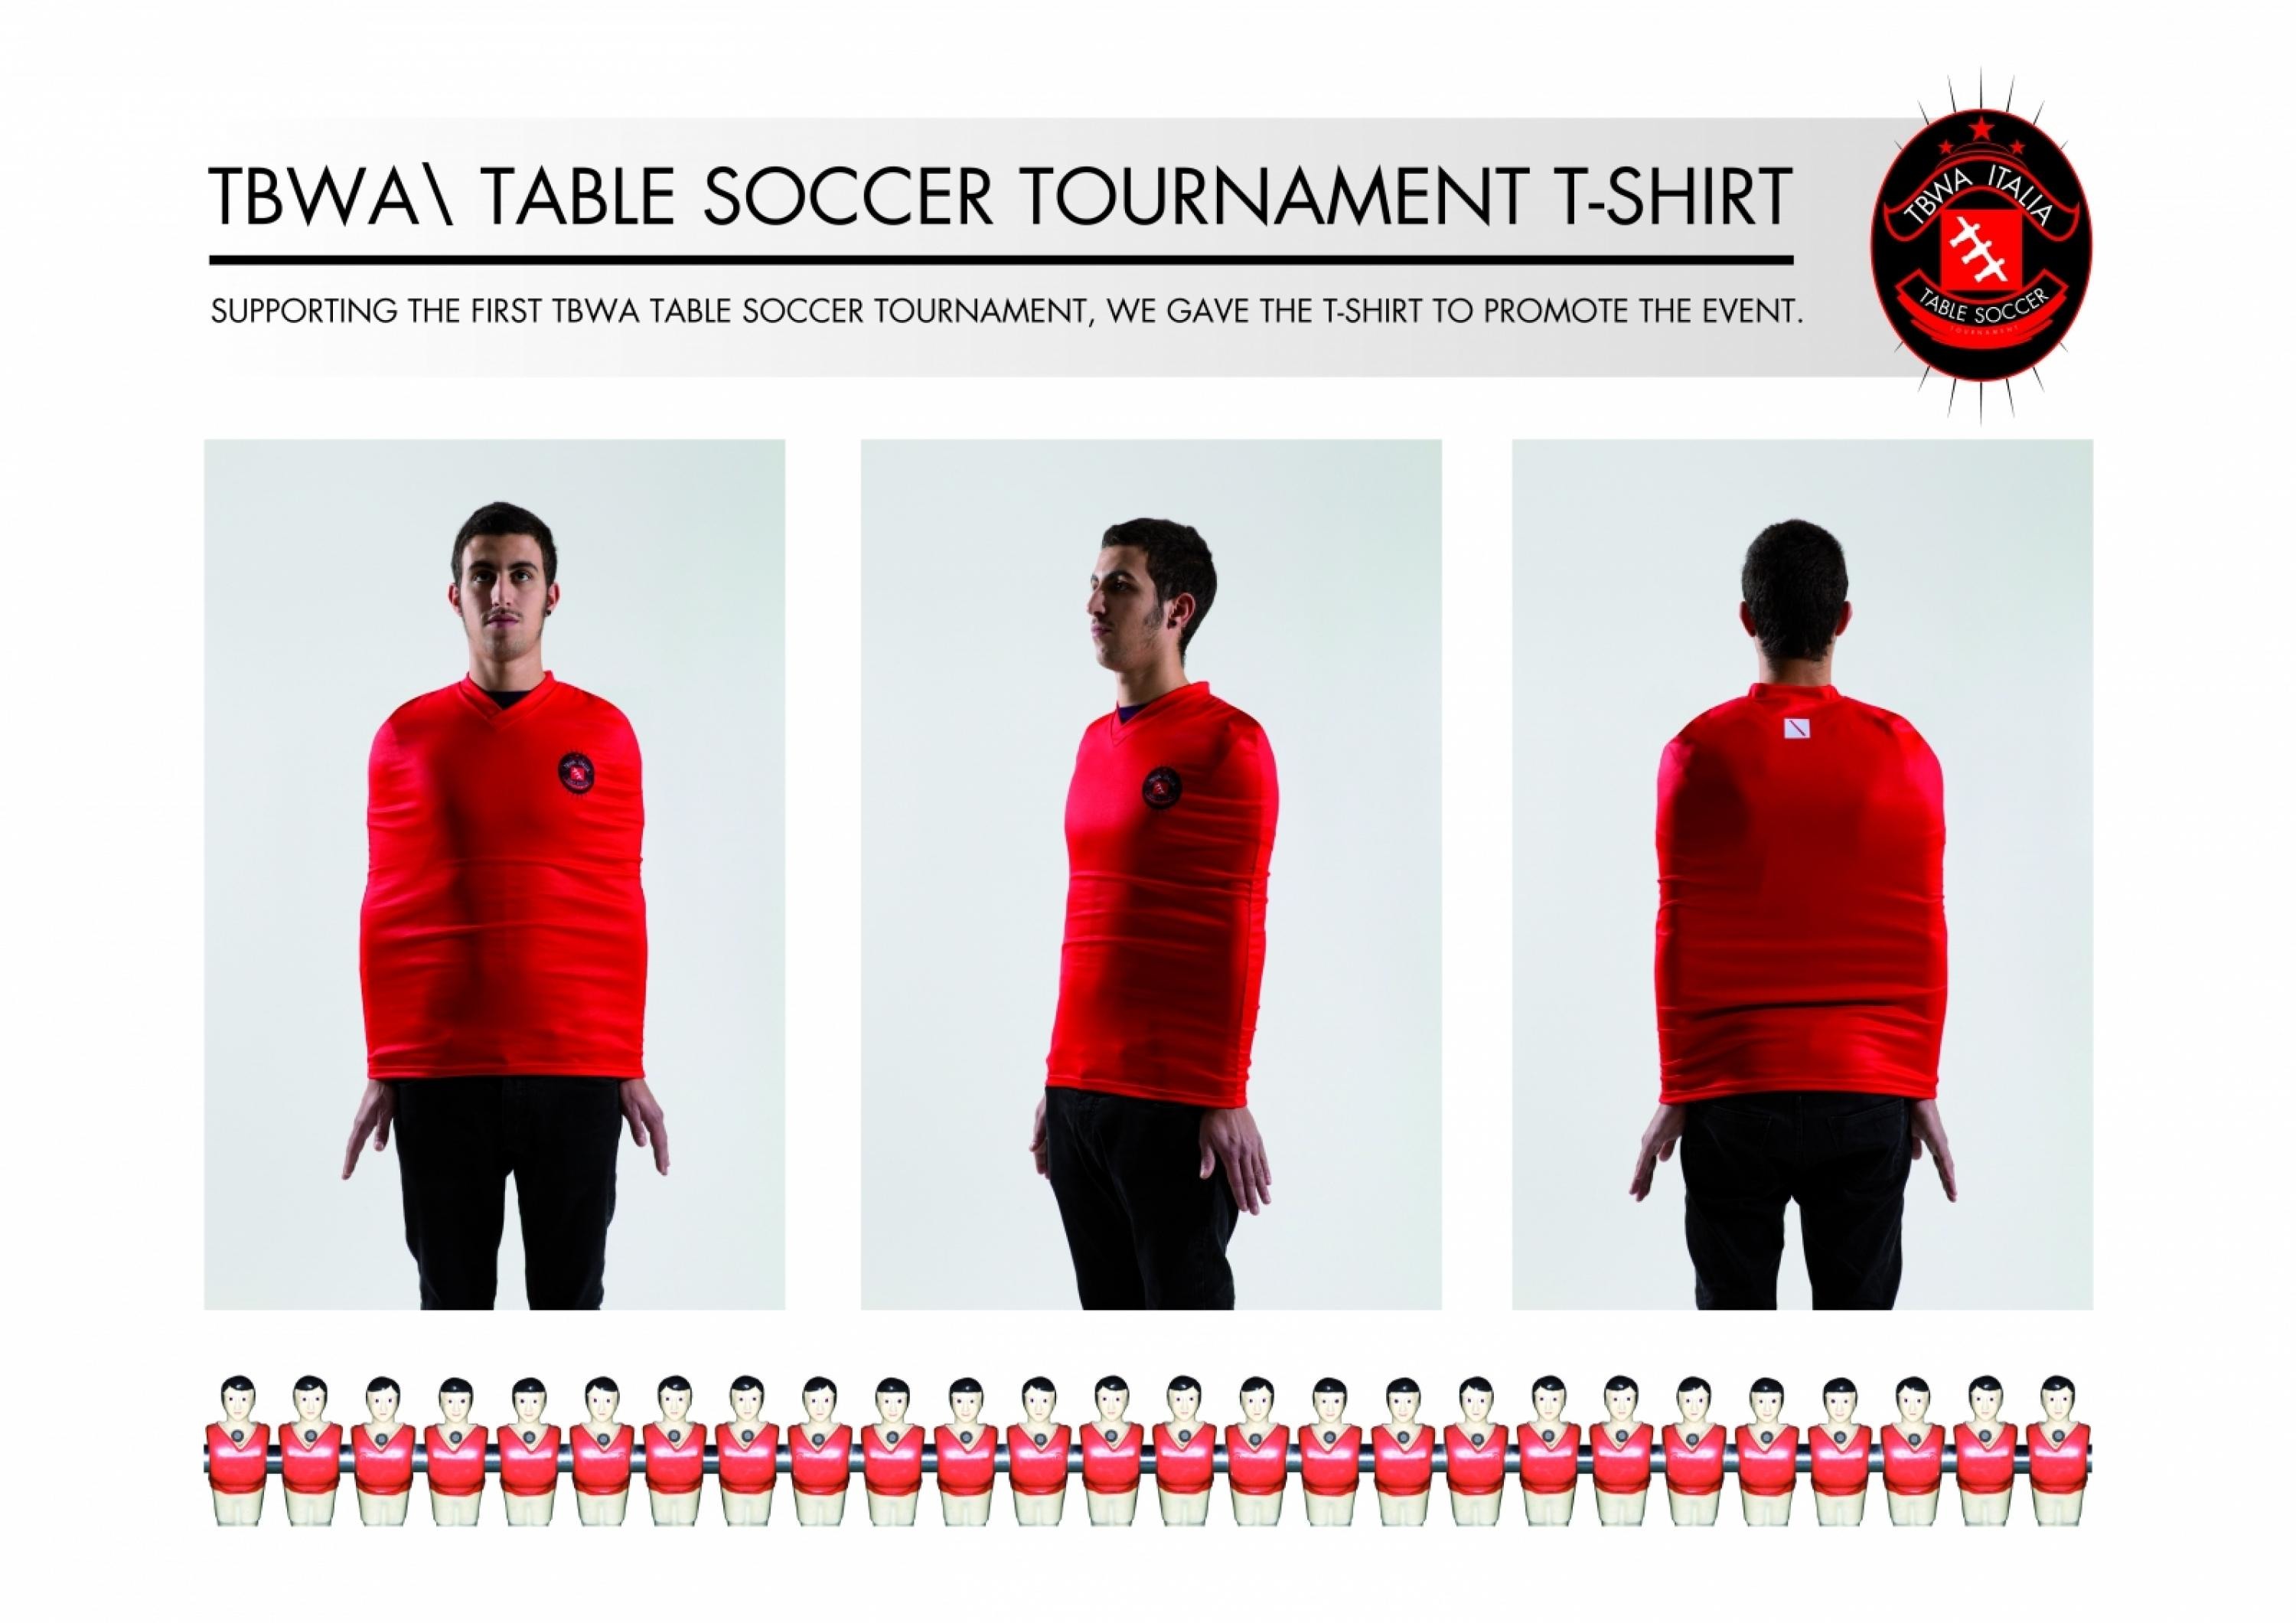 TBWA TABLE SOCCER TOURNAMENT